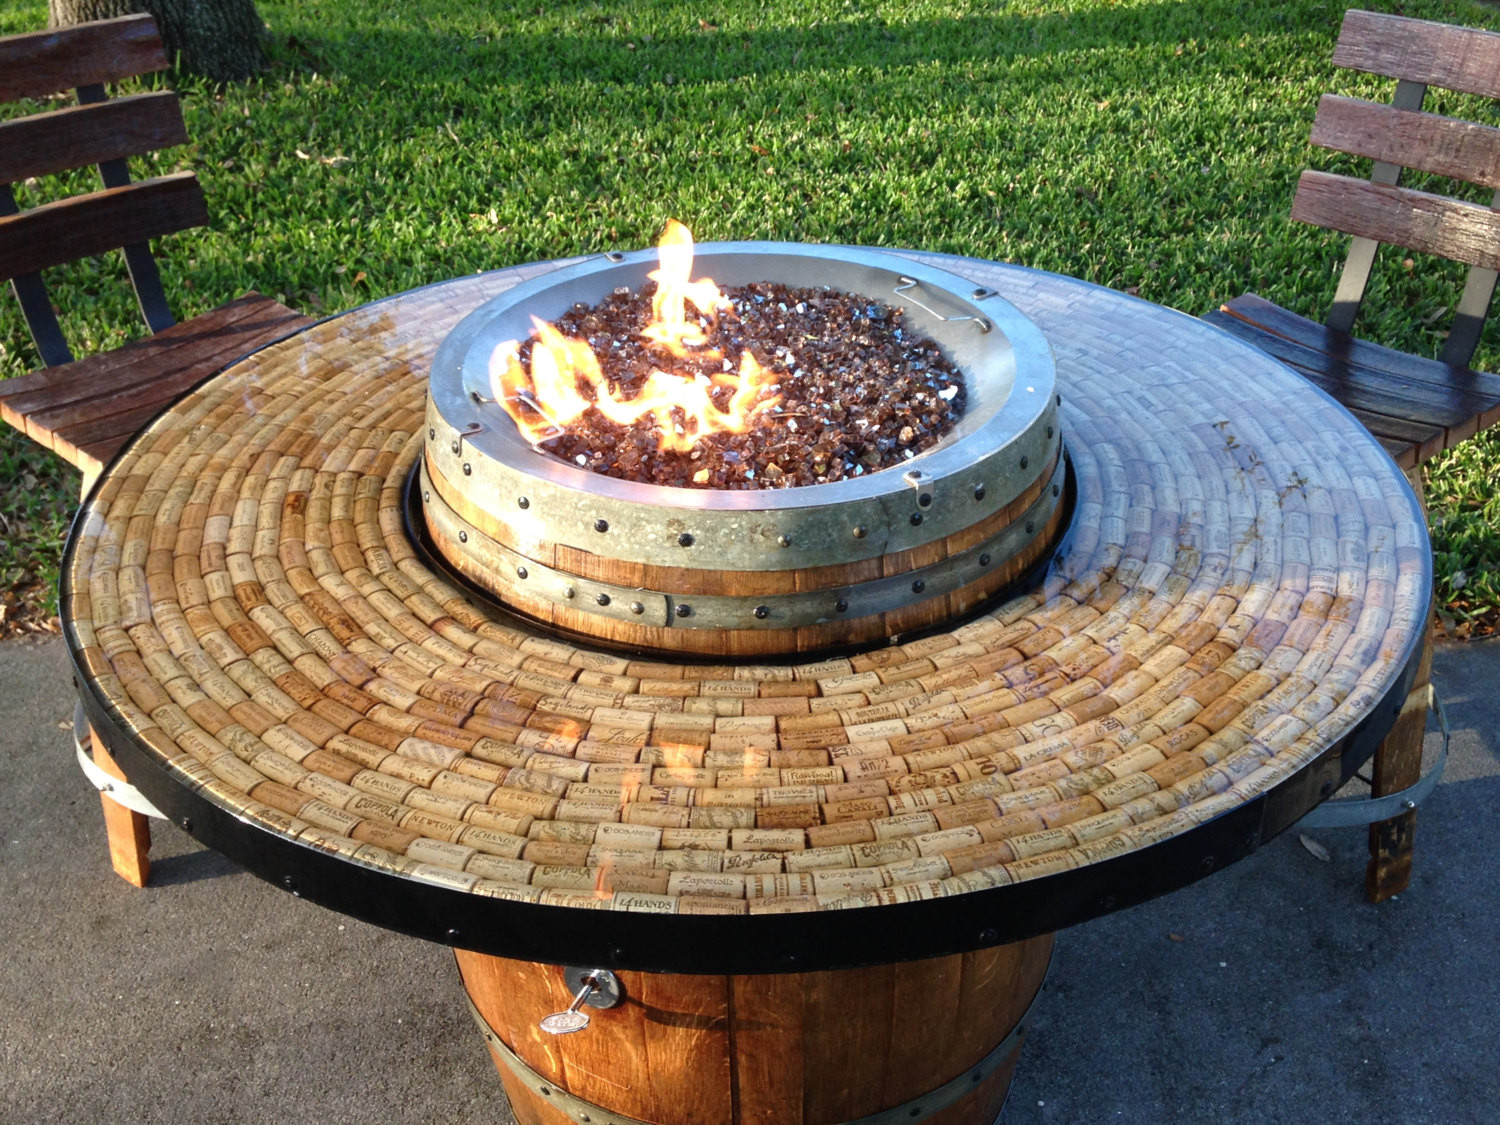 Patio Table With Firepit
 Wine Barrel Gas Fire Pit and Patio Table